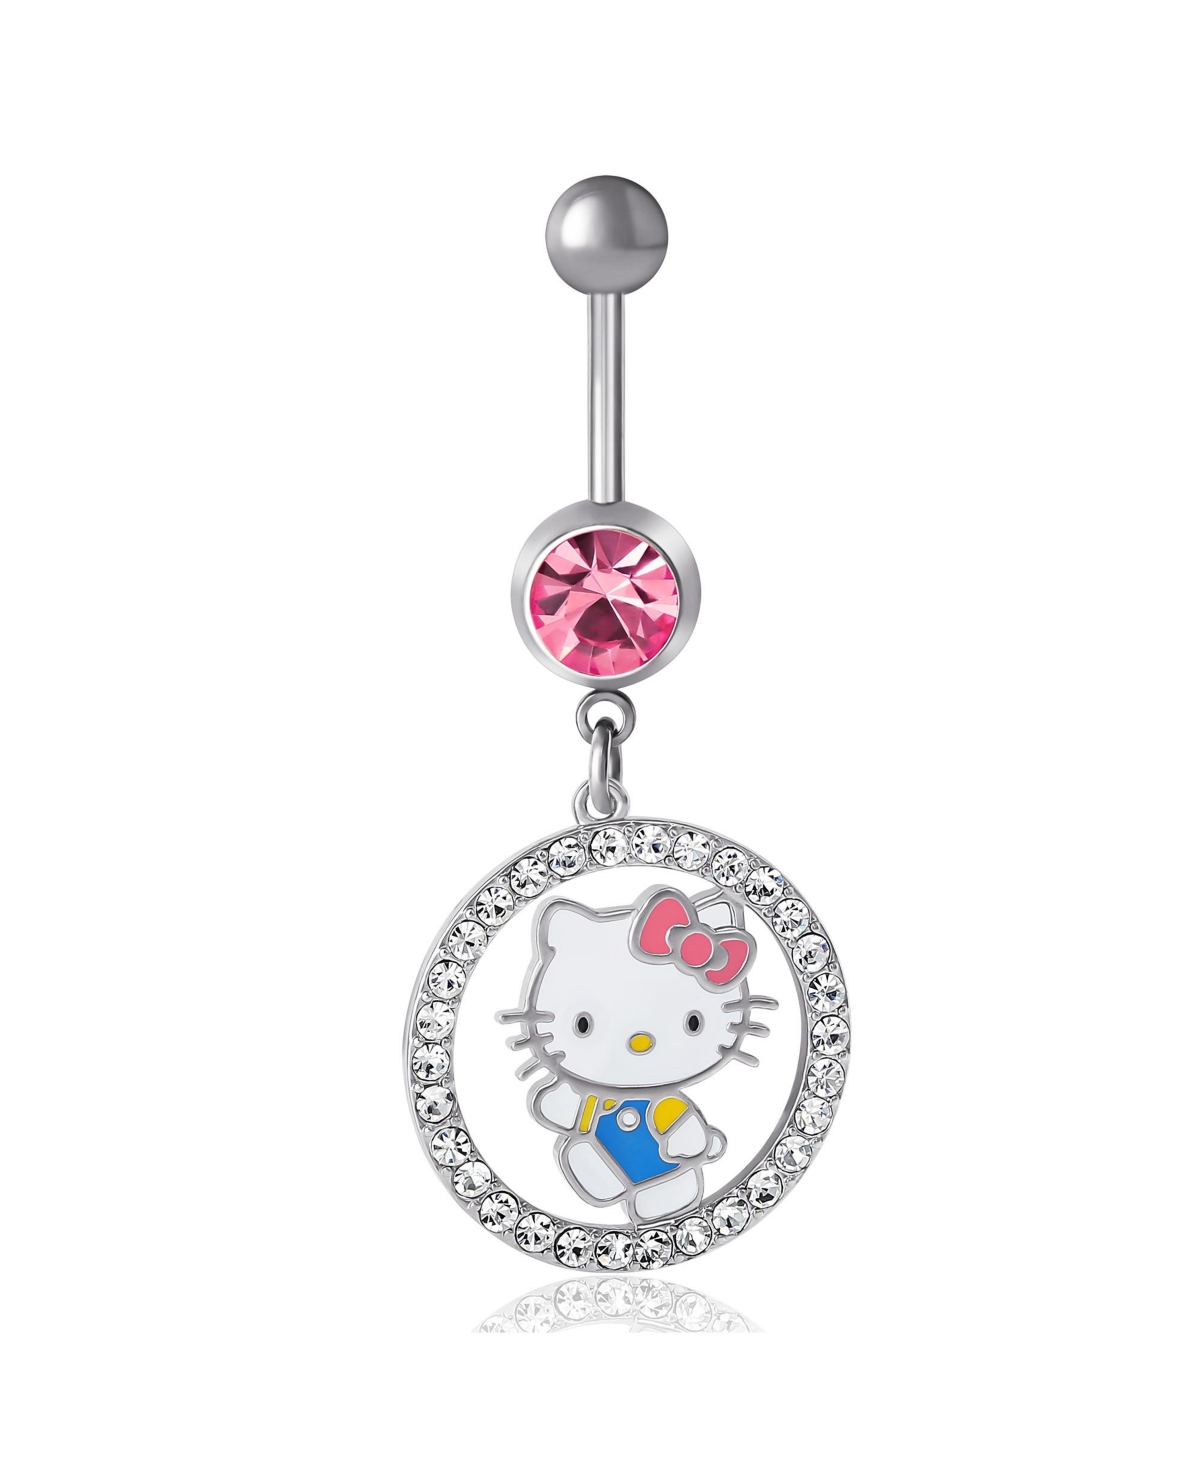 Sanrio 14G Stainless Steel (316L) Piercing Element Dangle Belly Button Ring - Crystal Ring - Silver tone, pink